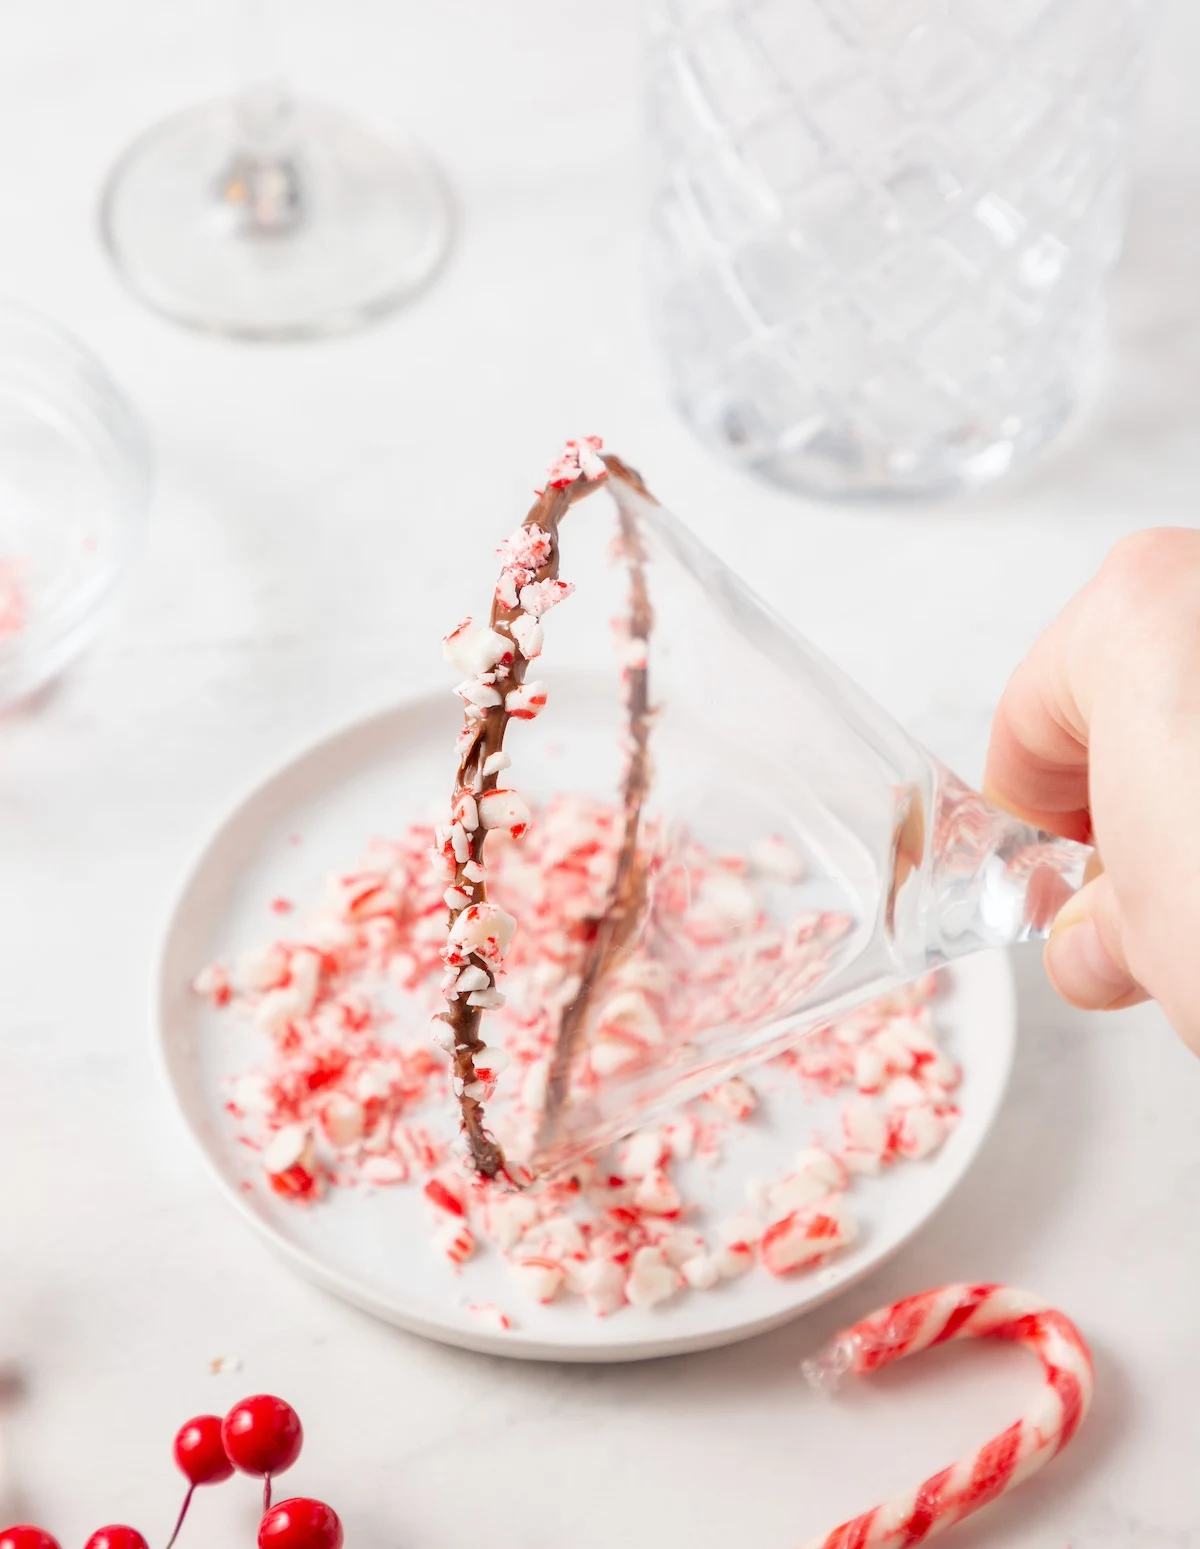 Dipping the melted chocolate into the candy cane pieces